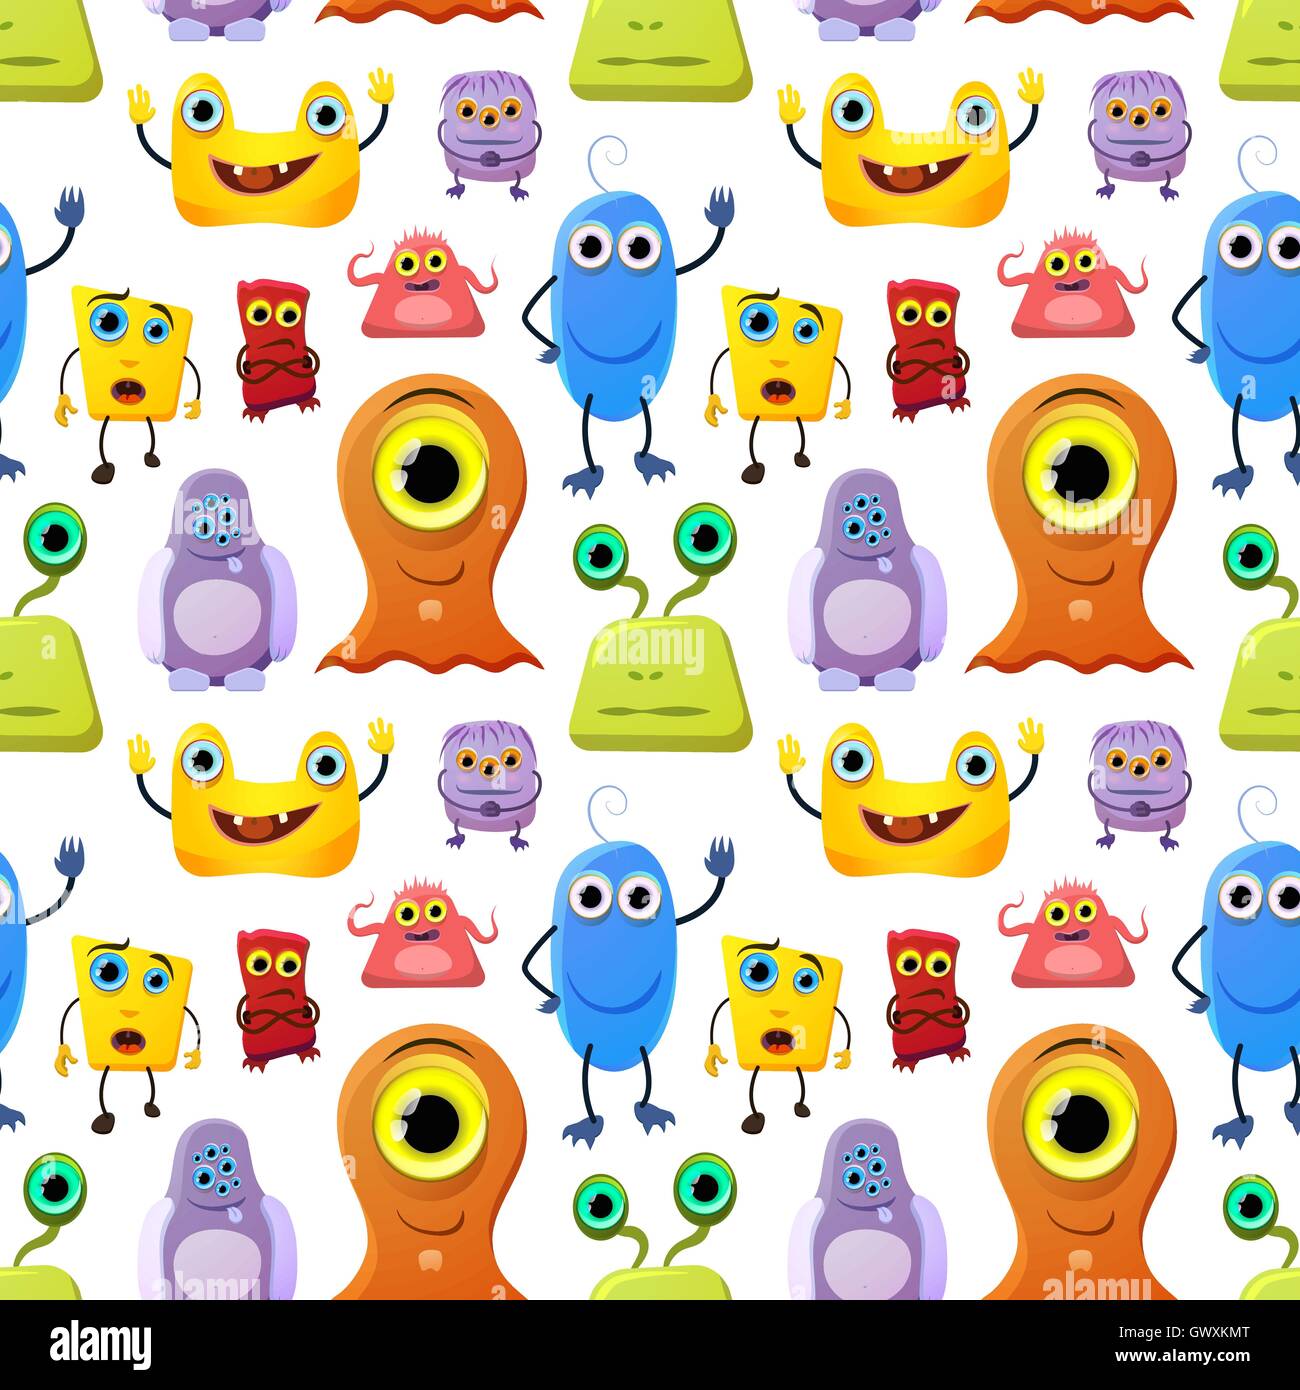 Crowd of cute monsters different colours on white background, seamless ...